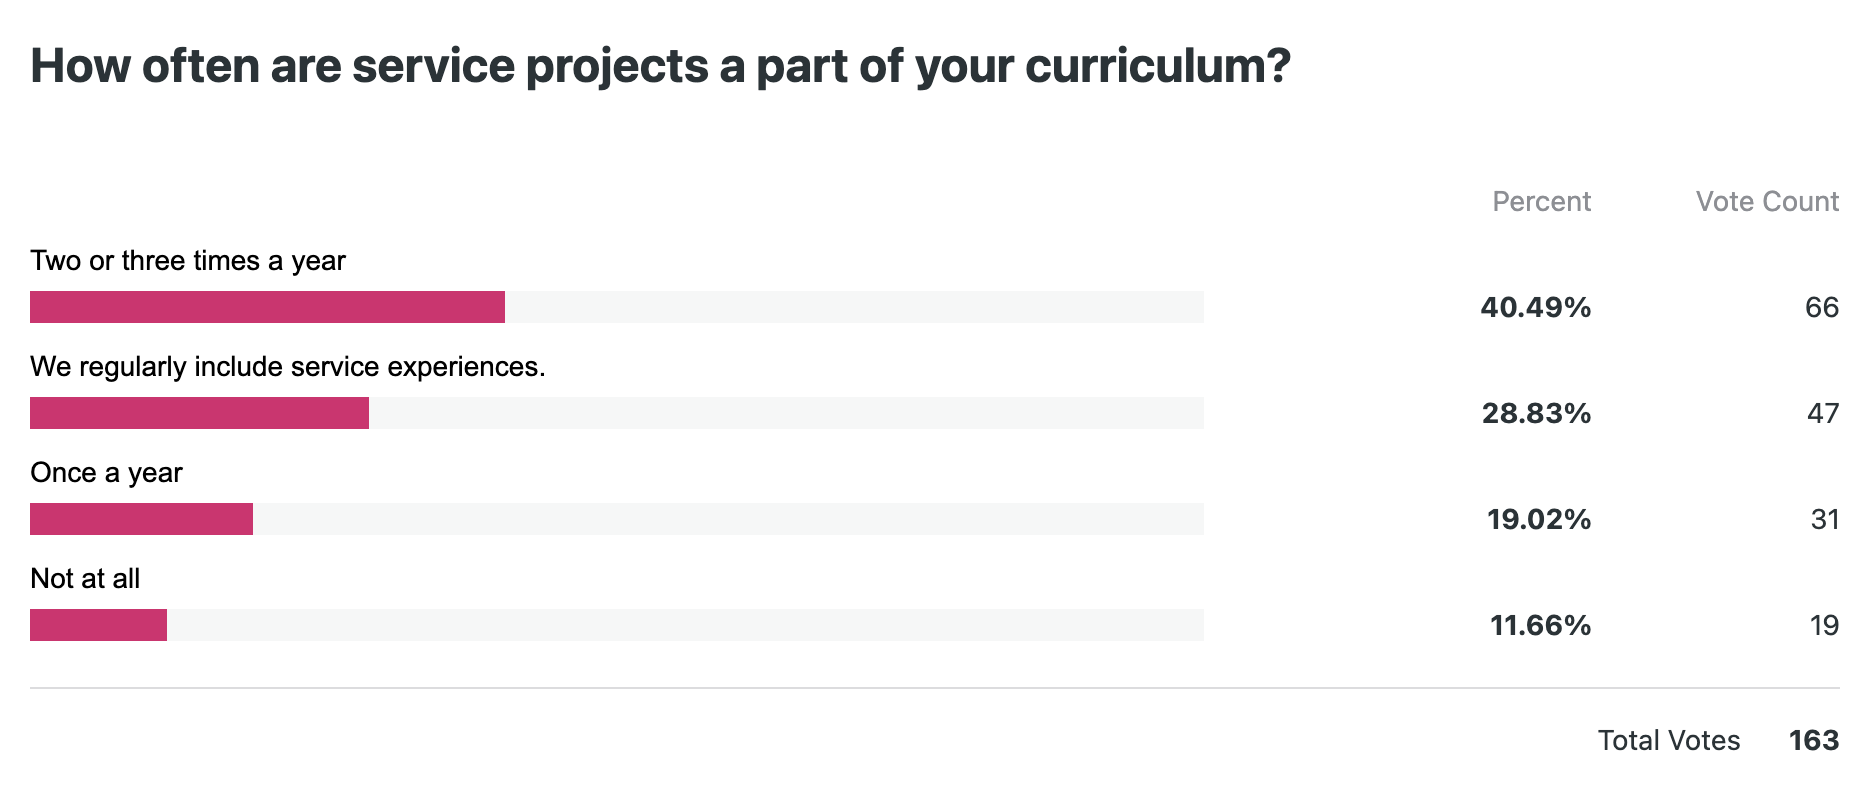 How often are service projects a part of your curriculum? - poll results